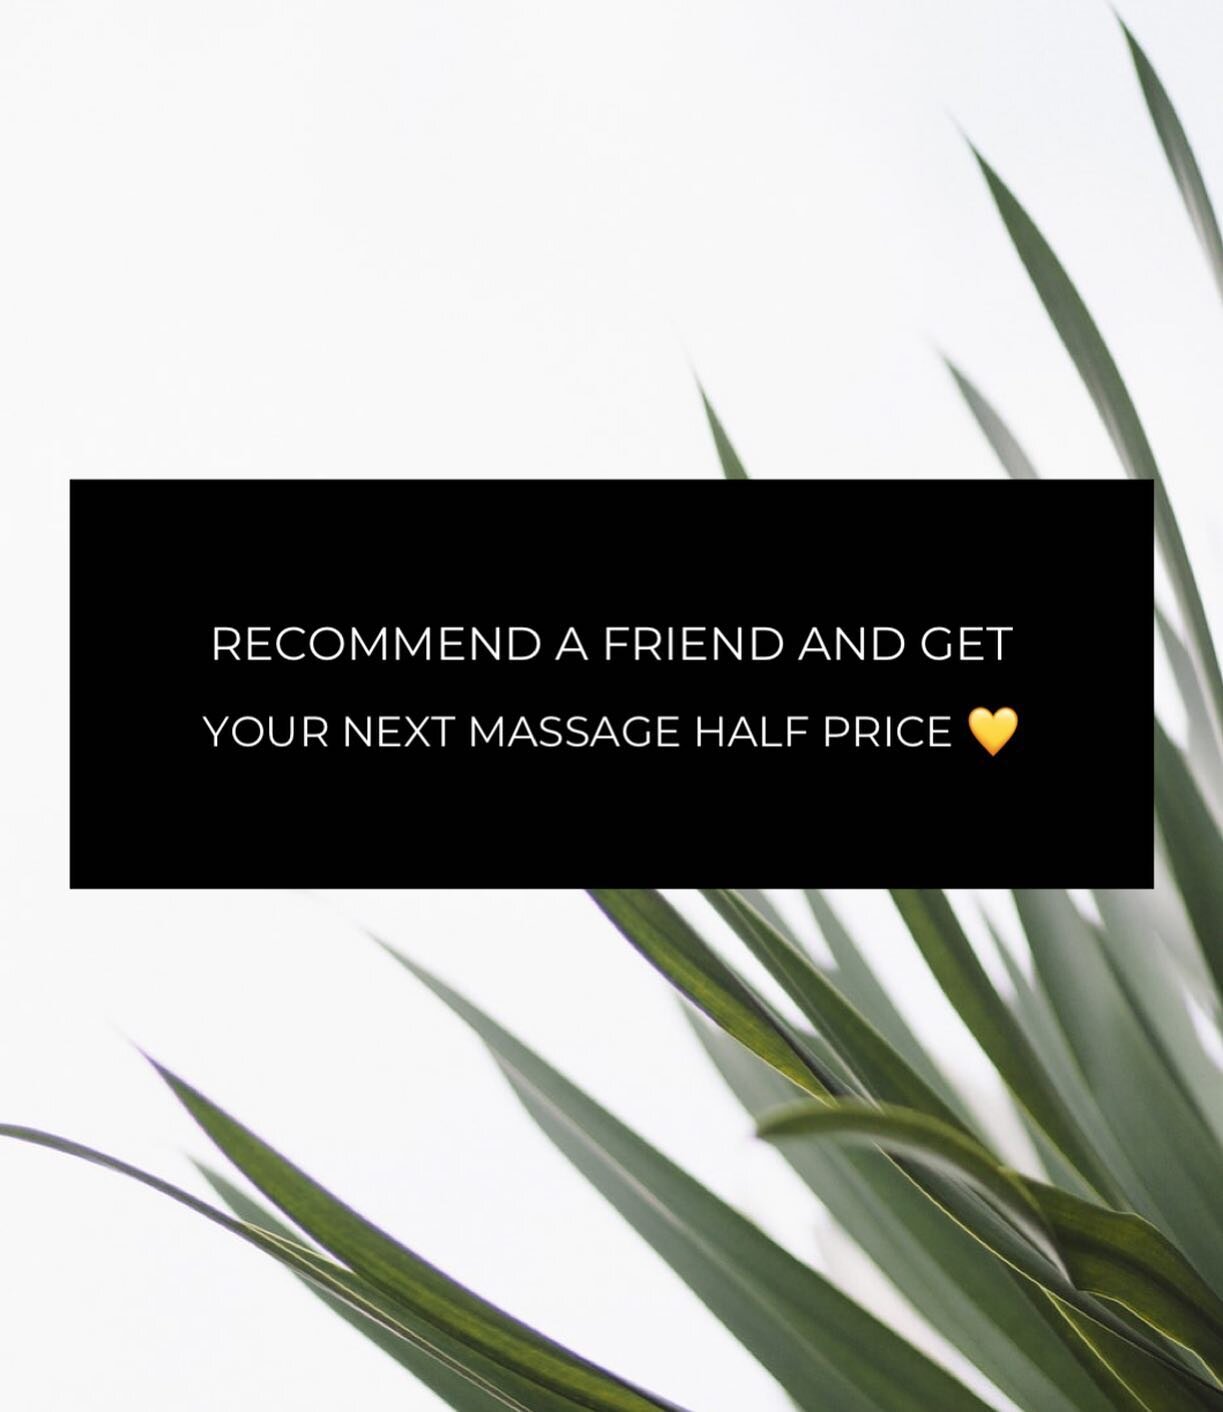 Happy Monday everyone ☺️
Just wanted to shout out about my latest offer:

Recommend a friend and get your next massage half price 💕

#massage #massagetherapy #brightonandhove #holisticmassage